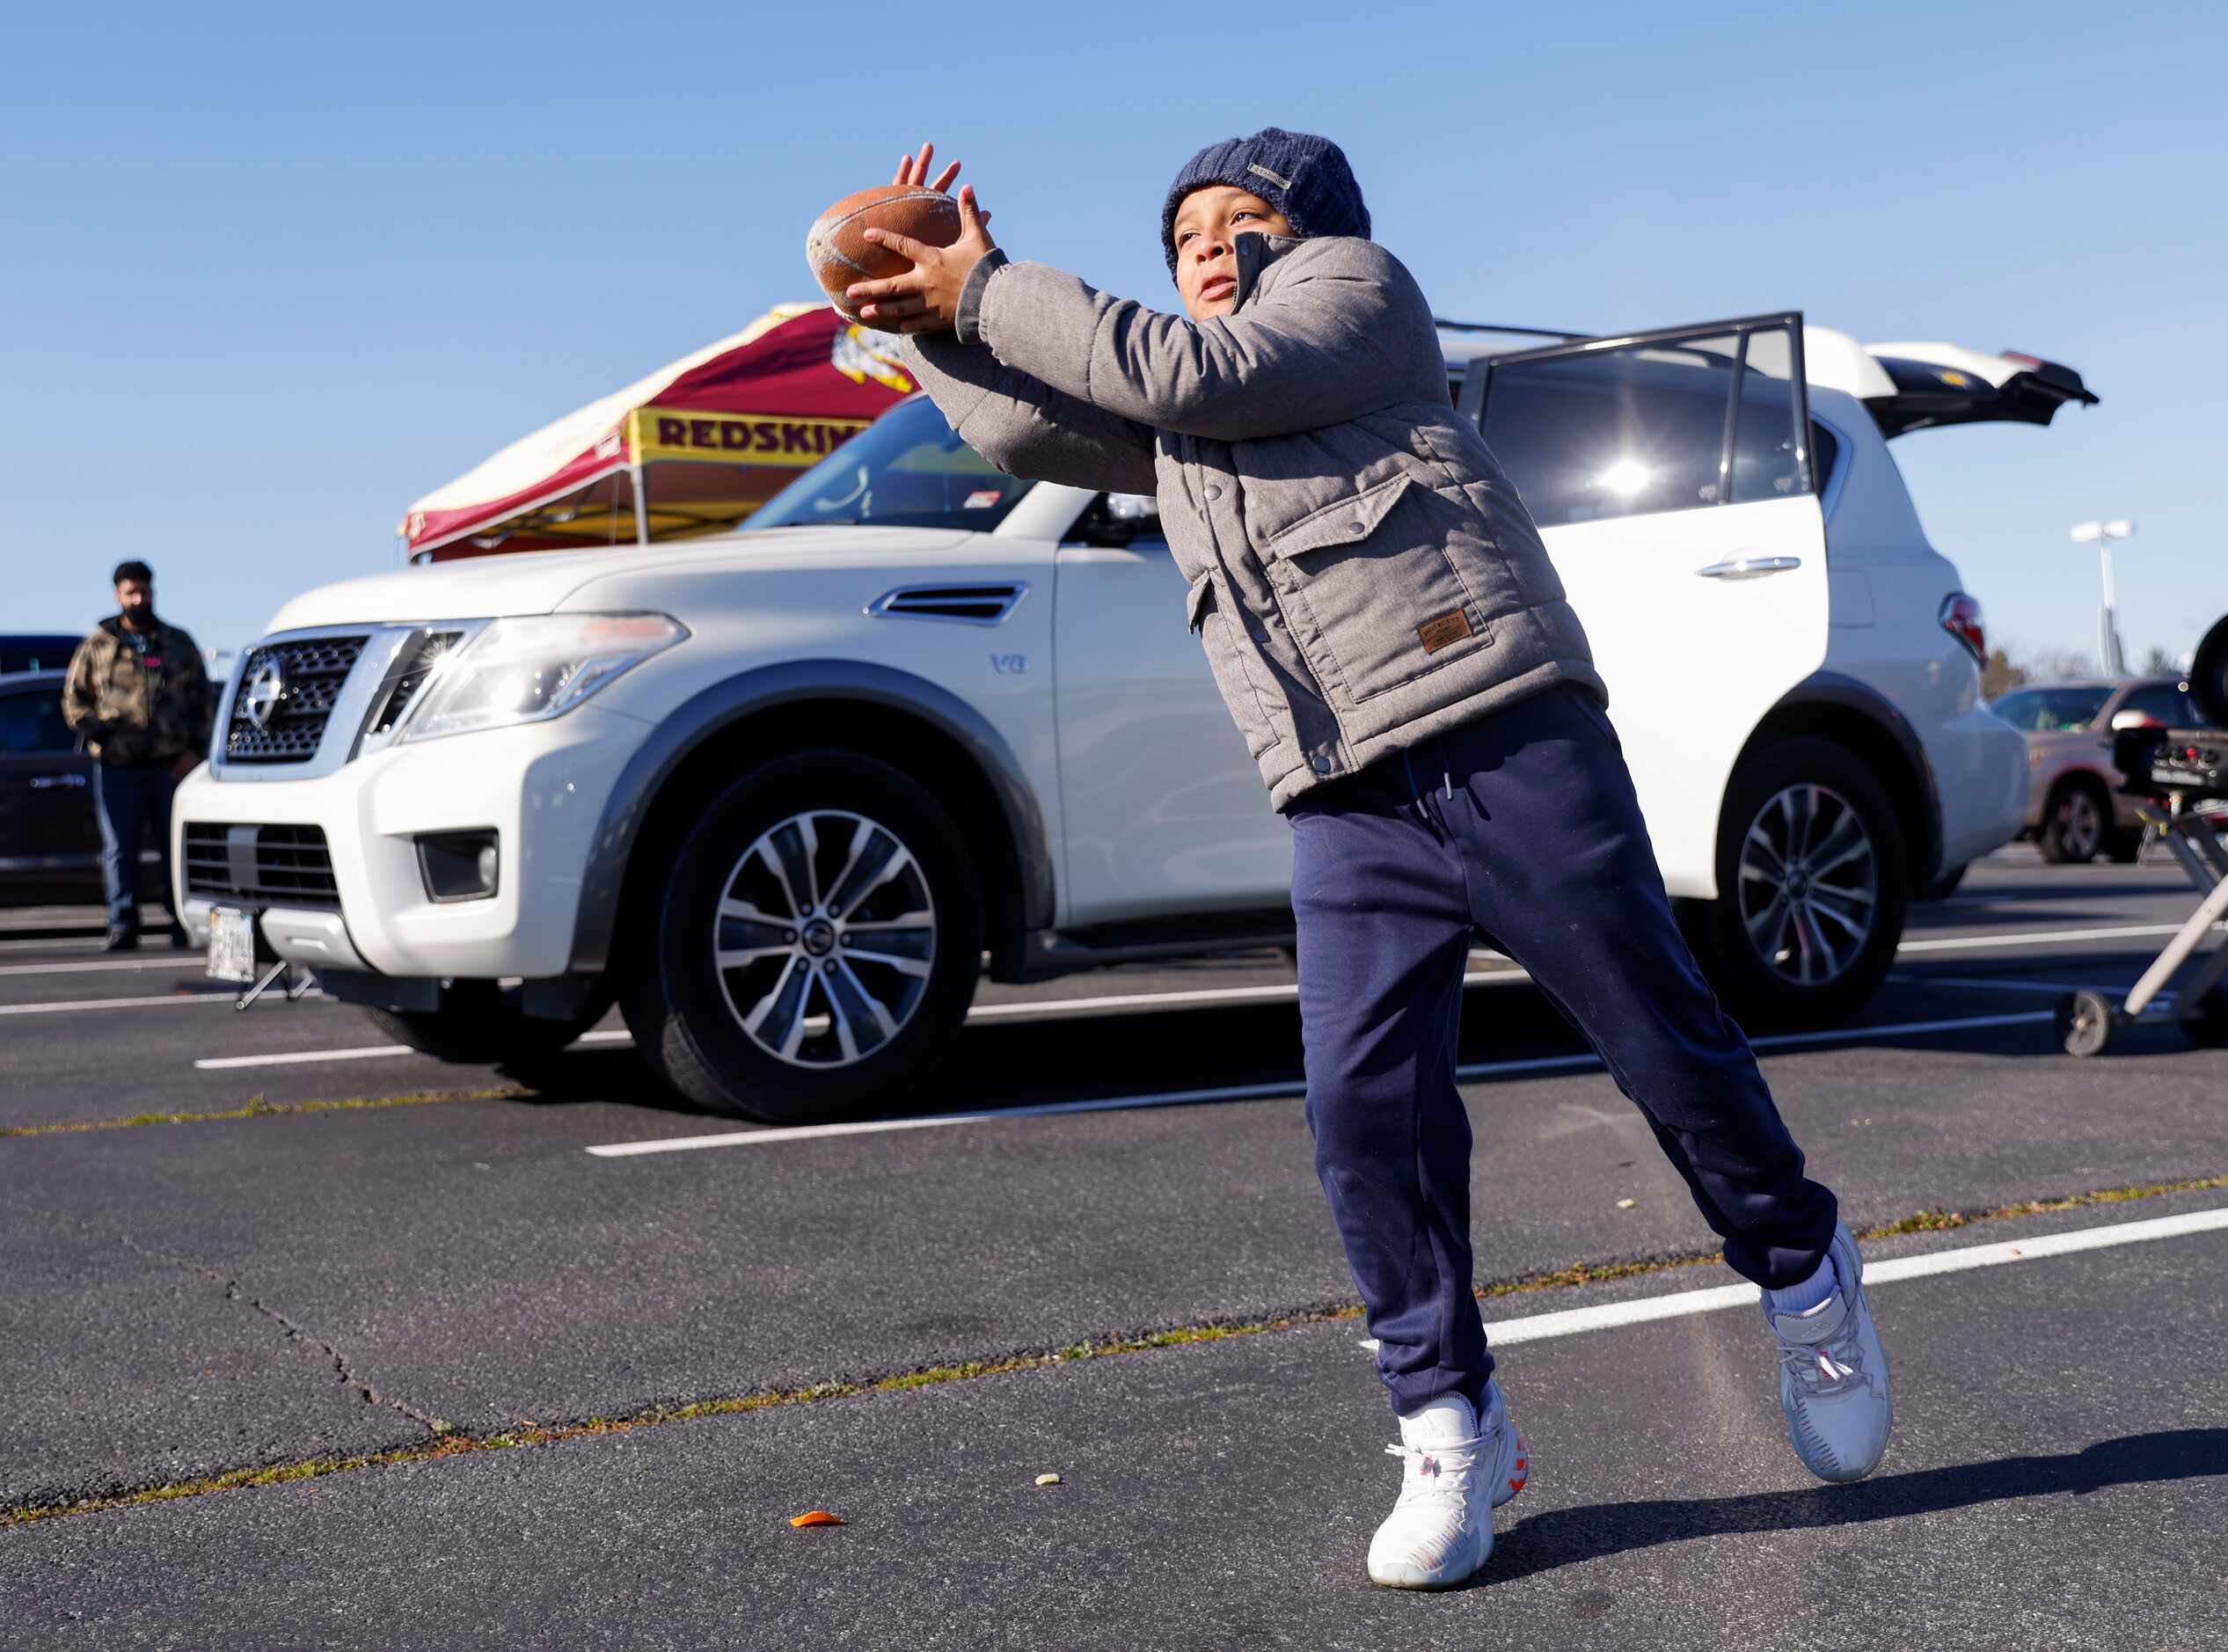 Dallas Cowboys fan Adrian Chavez, 9, of Fairfax, VA plays catch before the start of an NFL...